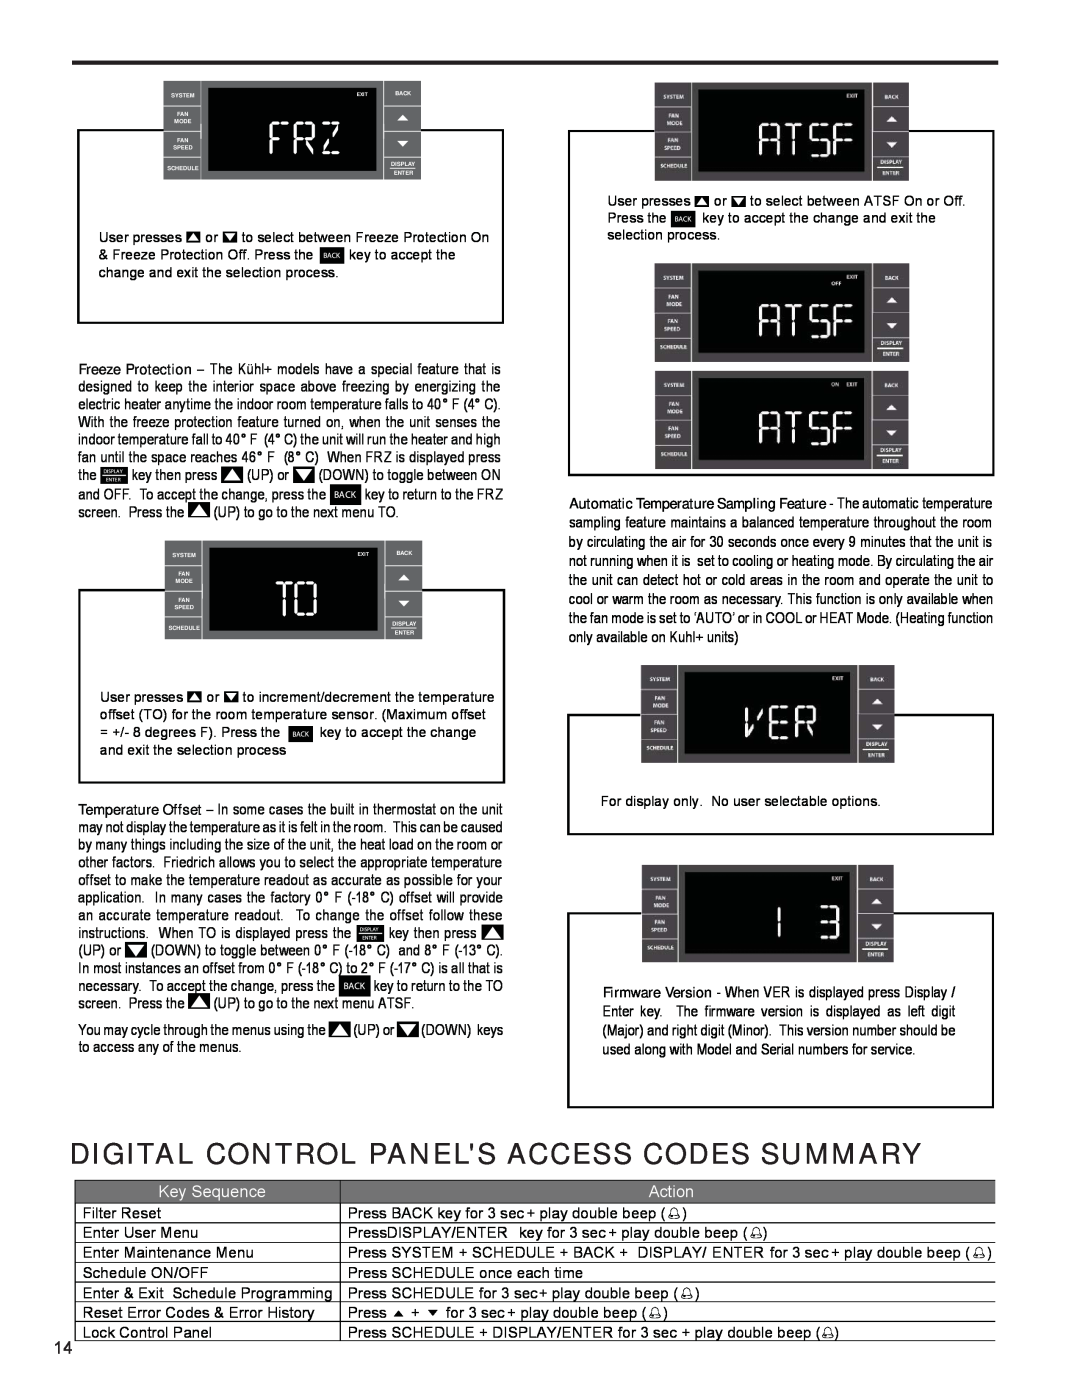 Friedrich R-410A service manual Digital Control Panels Access Codes Summary, Key Sequence, Action 